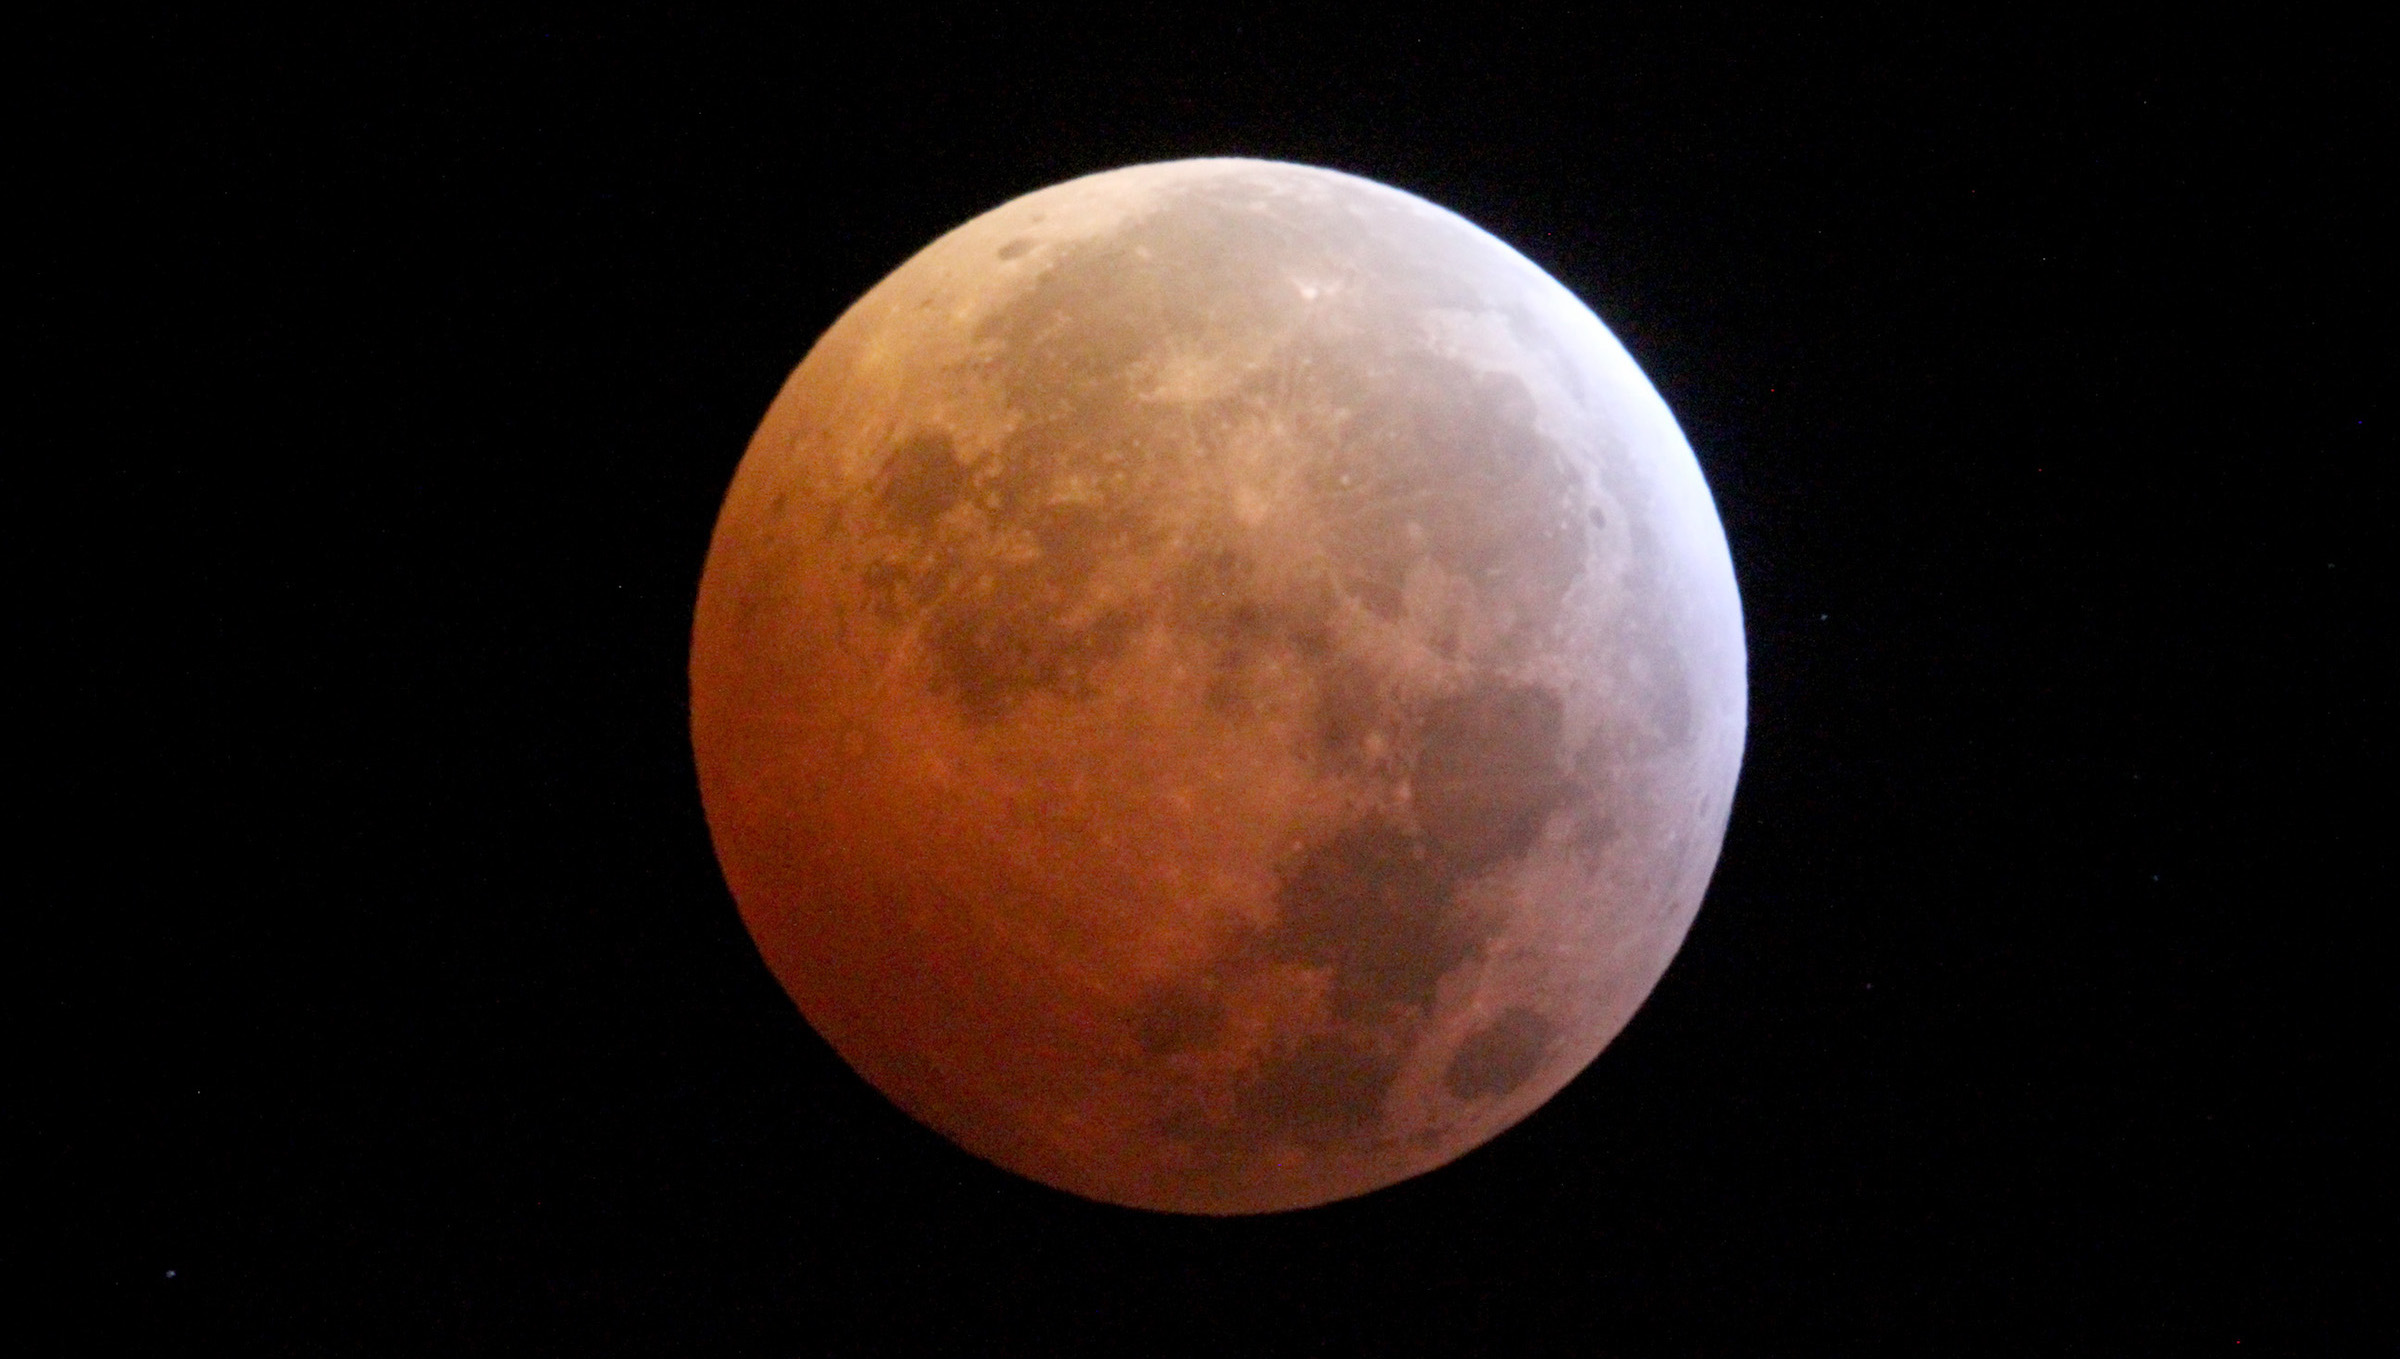 The moon looks red during a total lunar eclipse